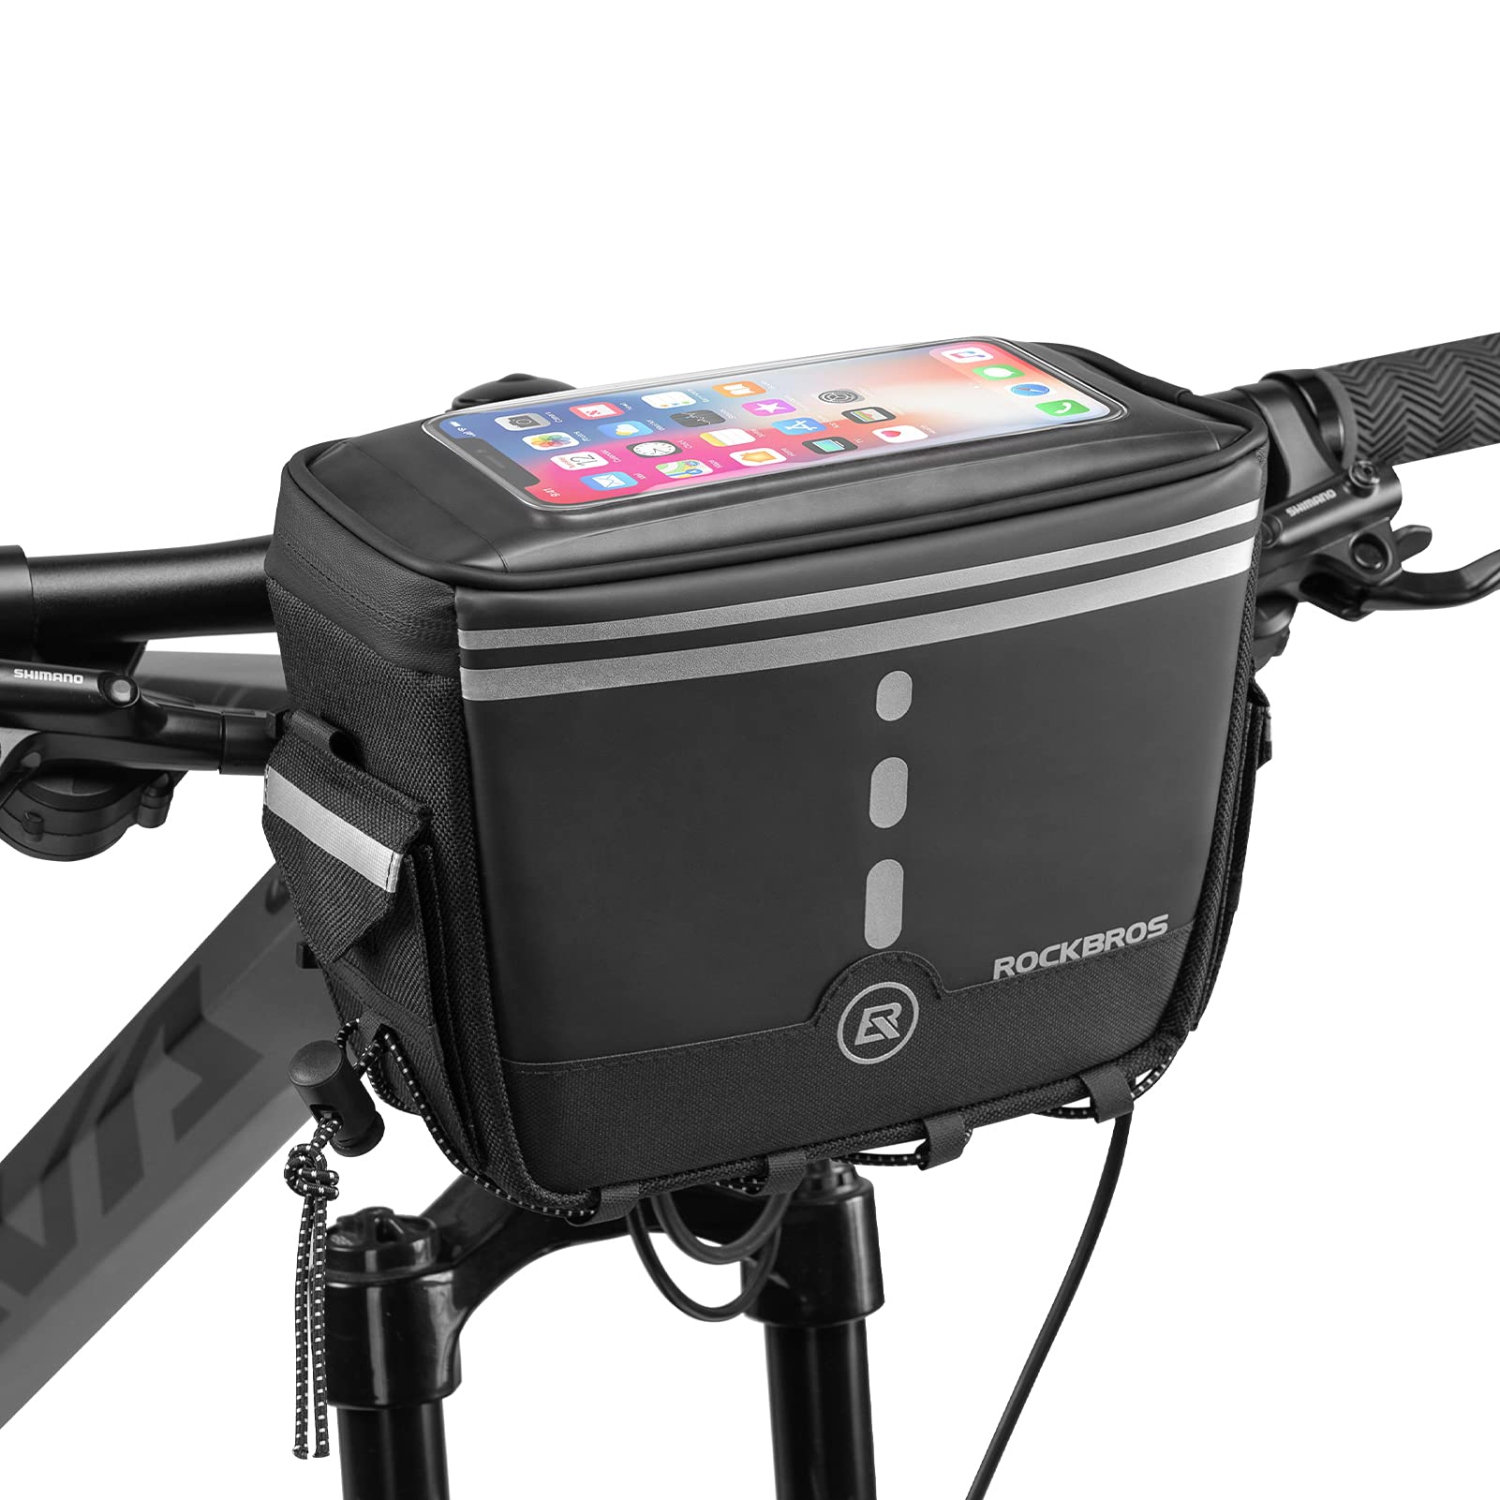 Bike Handlebar Bag Bicycle Front Storage Bag Bike Basket Pouch Bags Touch Screen Cell Phone Holder Bag with Removable Shoulder Strap